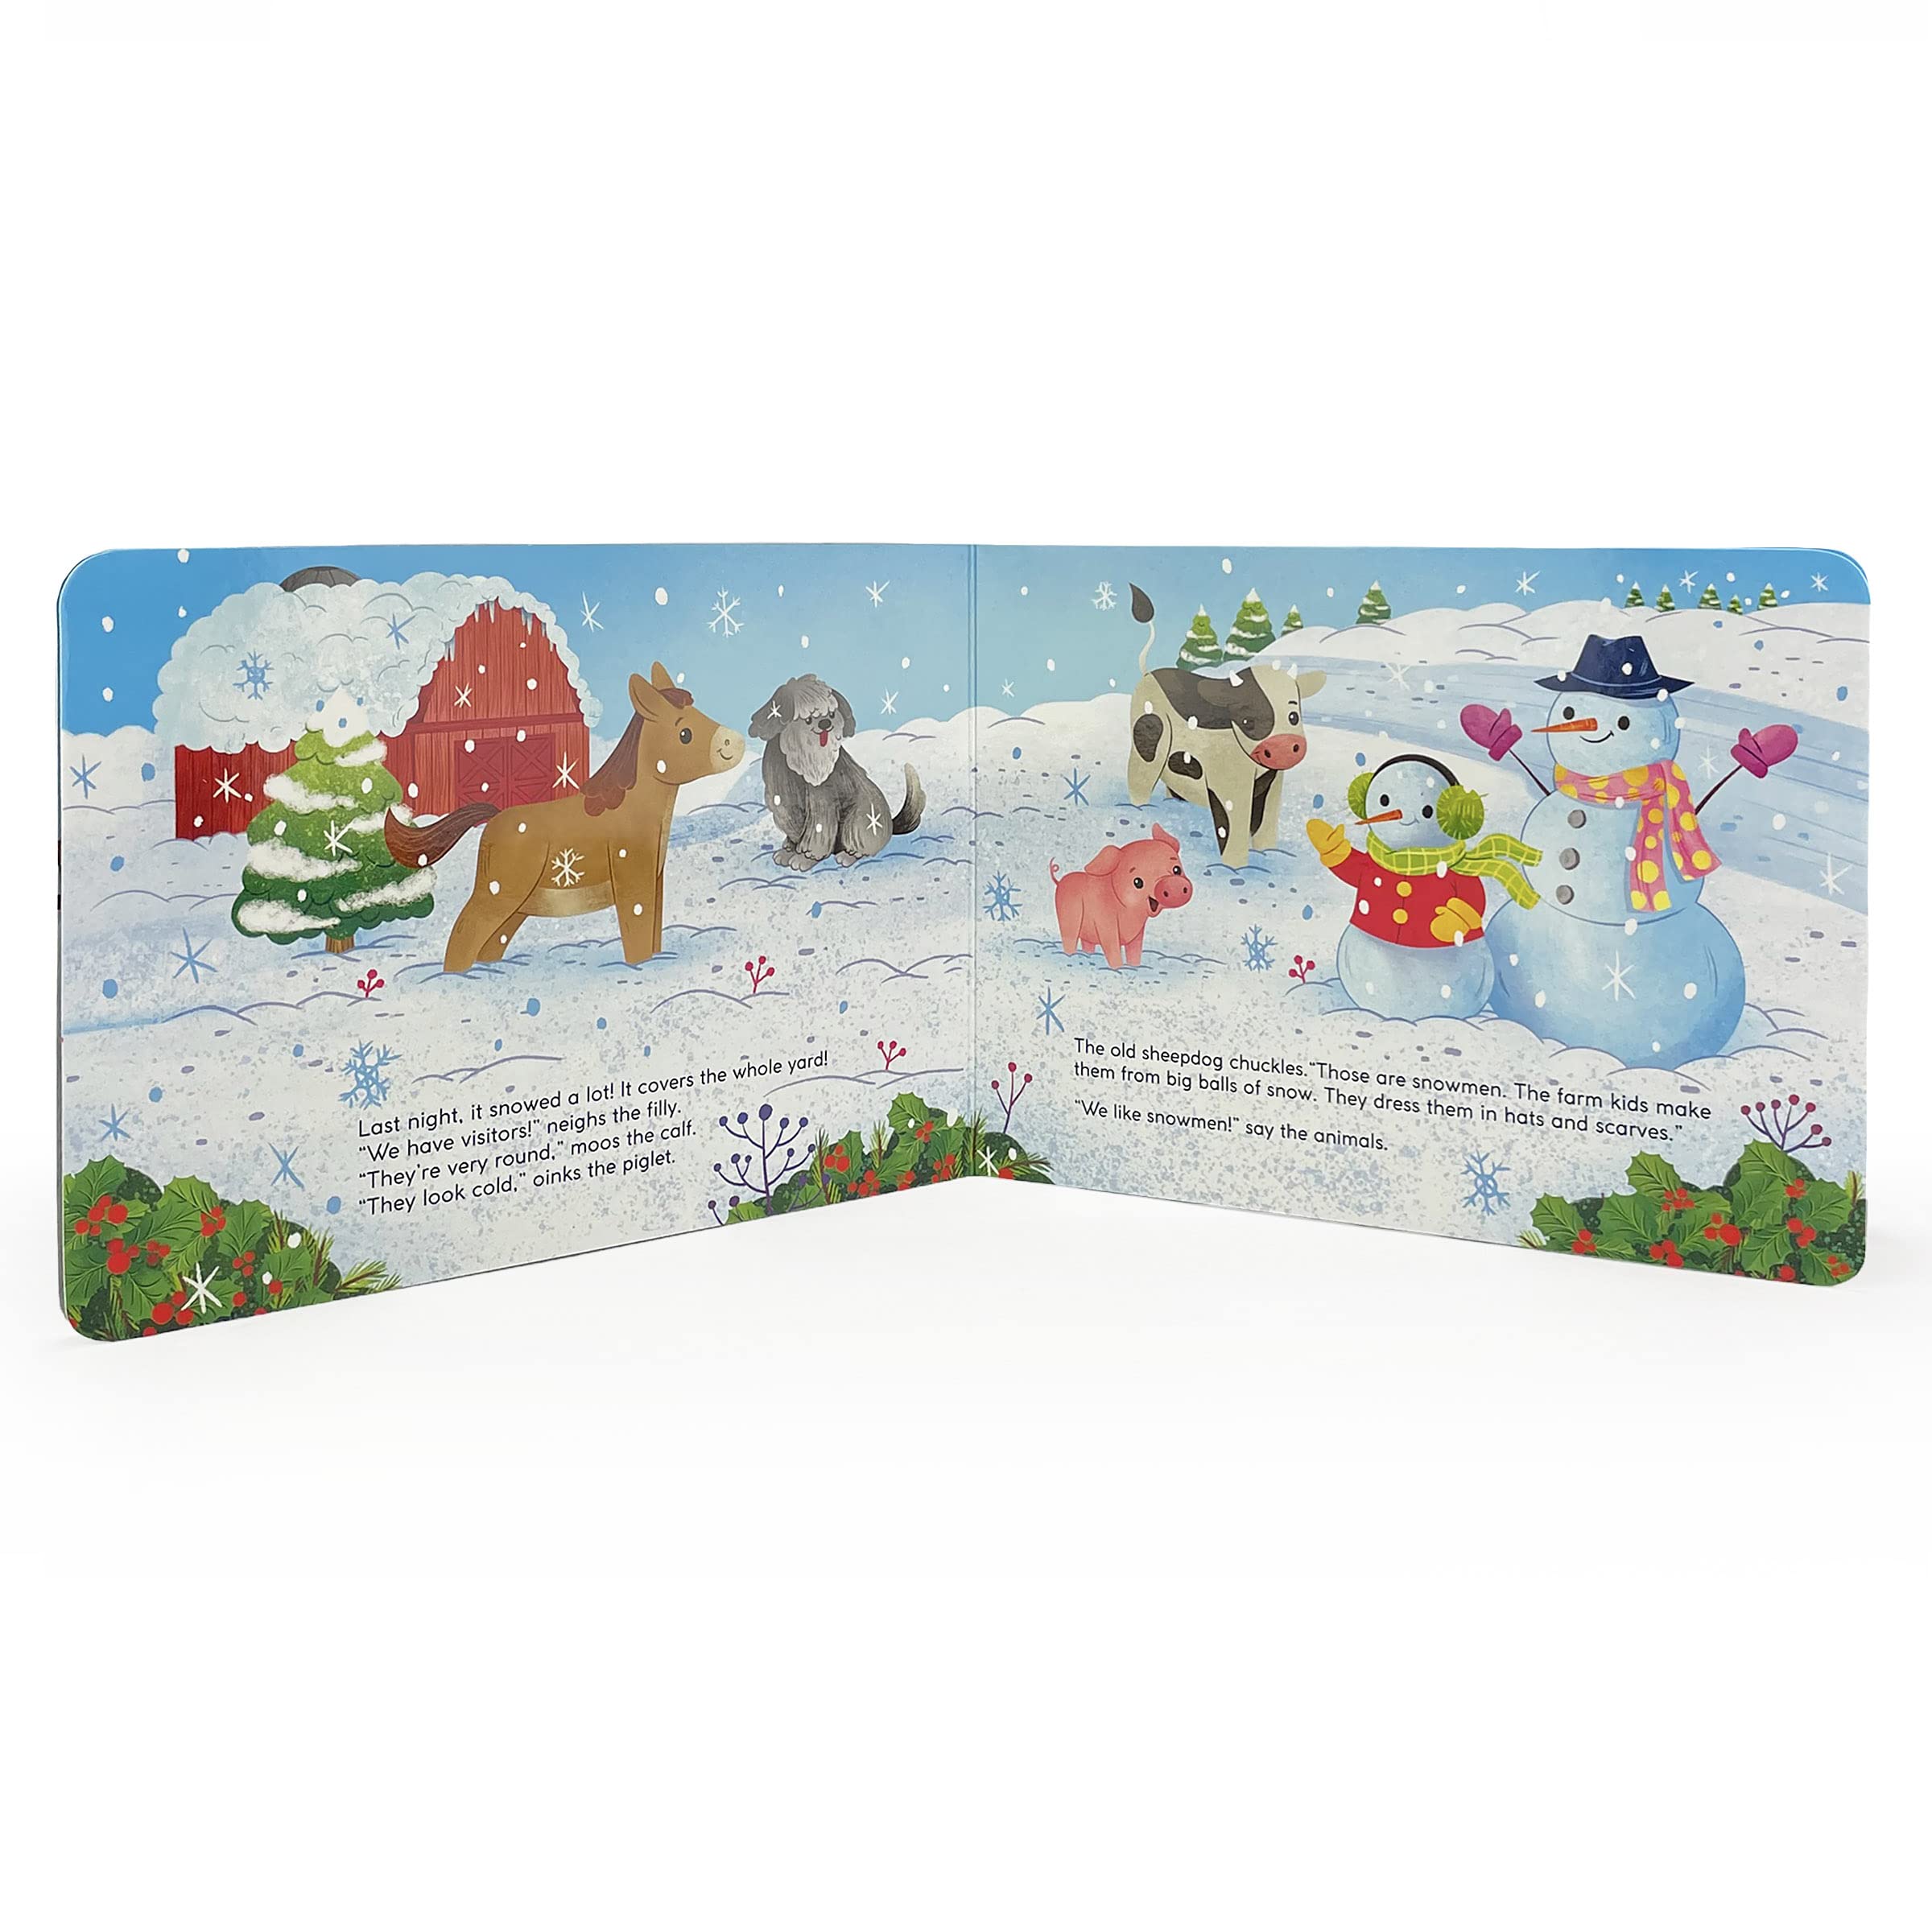 First Christmas On The Farm - Children's Winter Picture Board Book, Made in the USA, Ages 1-4